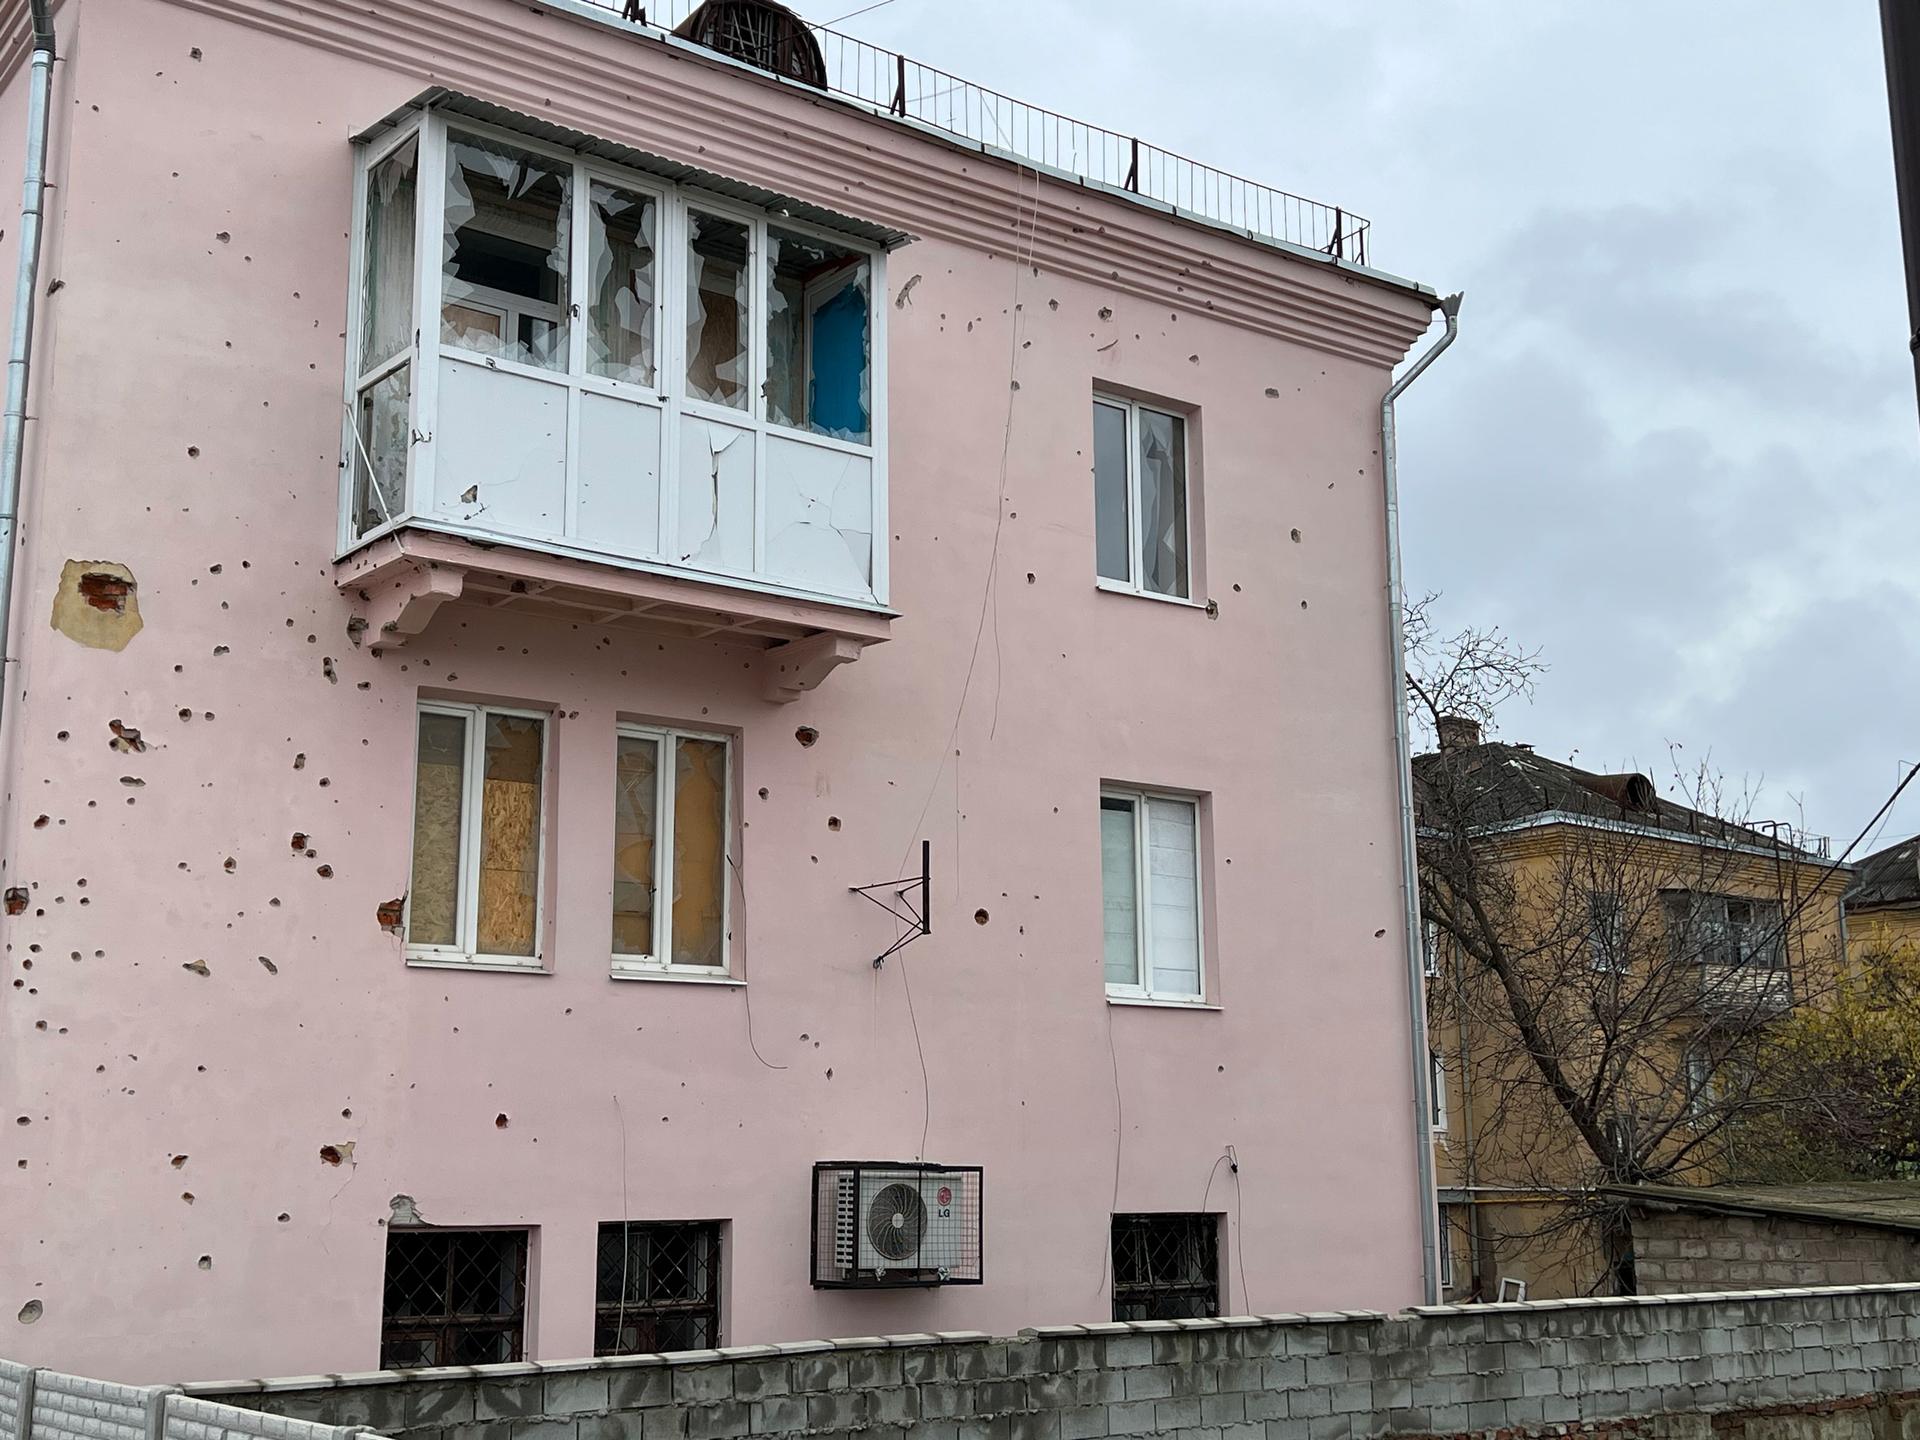 The city of Izium in northeastern Ukraine was liberated from Russian occupation in September but the damage left by the fighting is visible all cross the city.